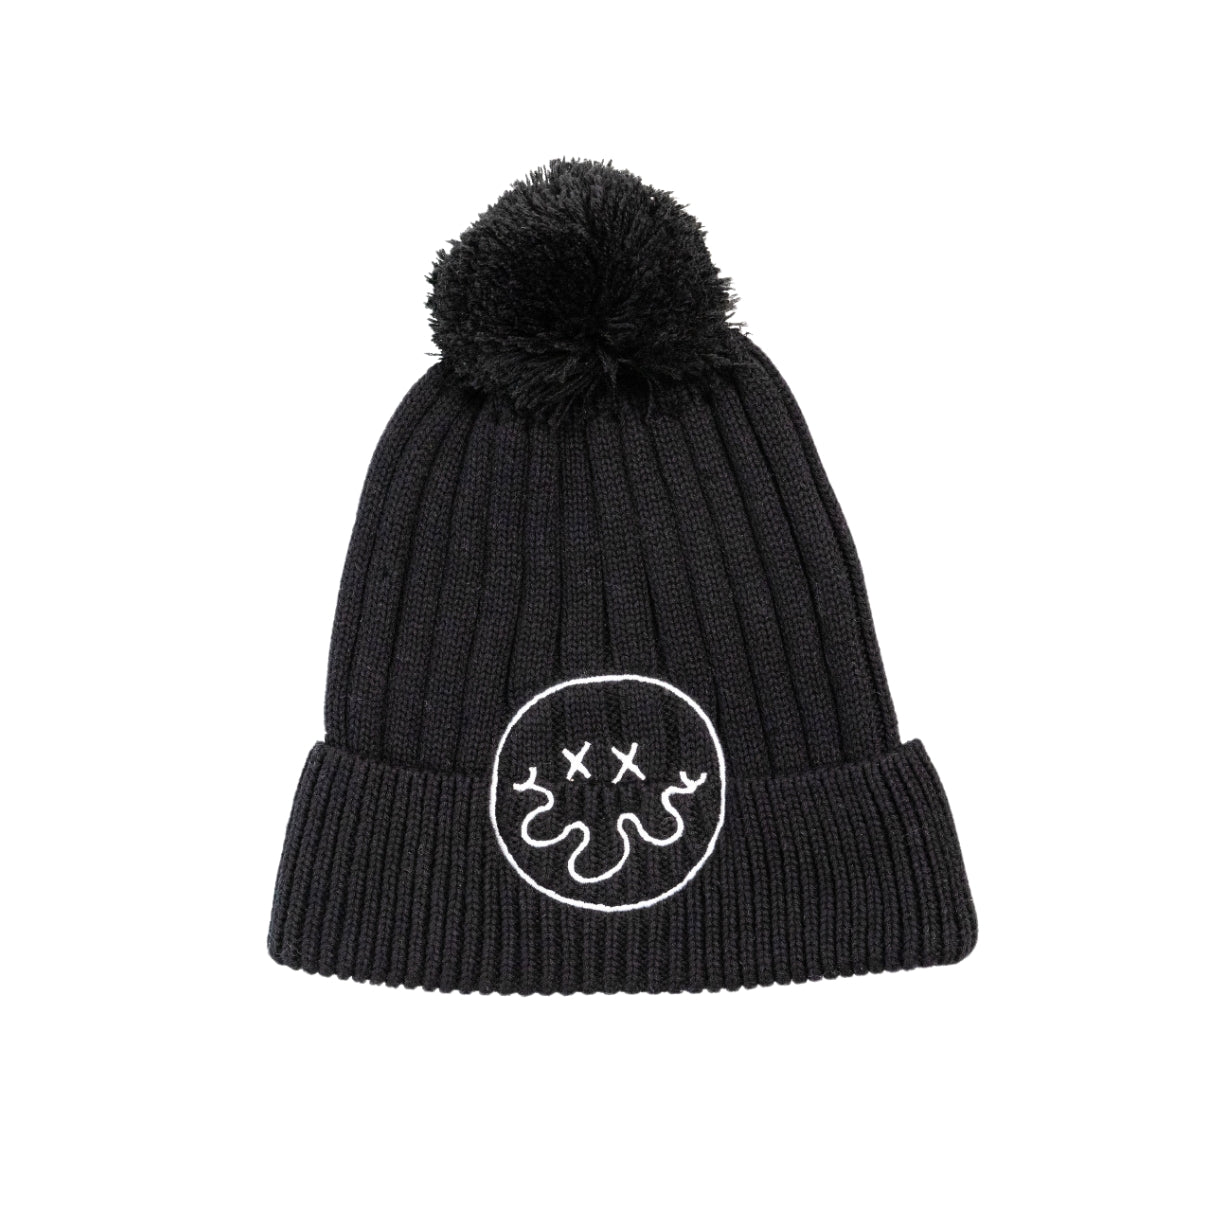 Band Of Boys | The Collectibles Squiggle Beanie Black